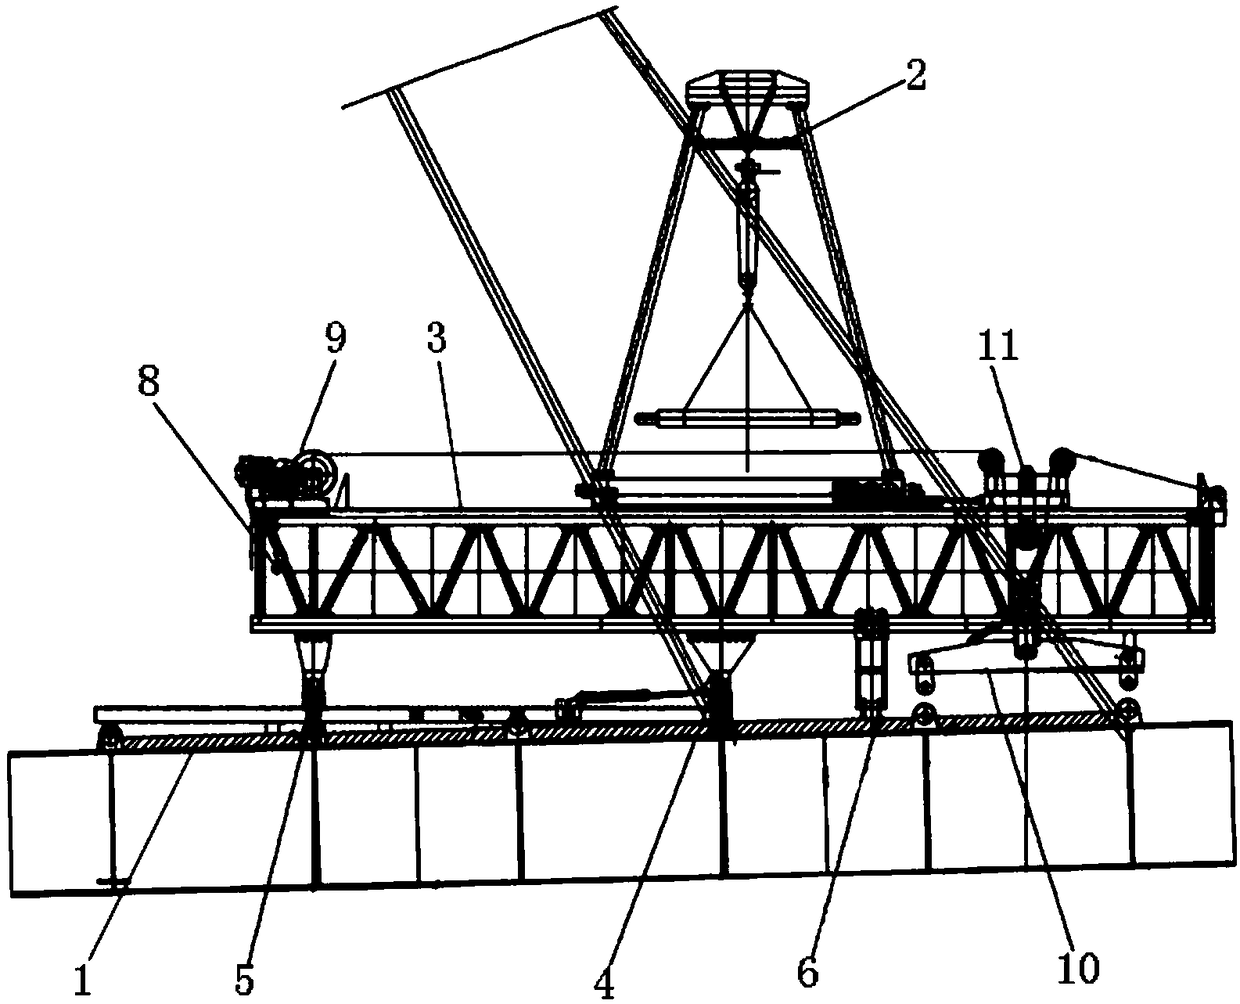 Integrated bridge deck hoisting device for superposed beam construction